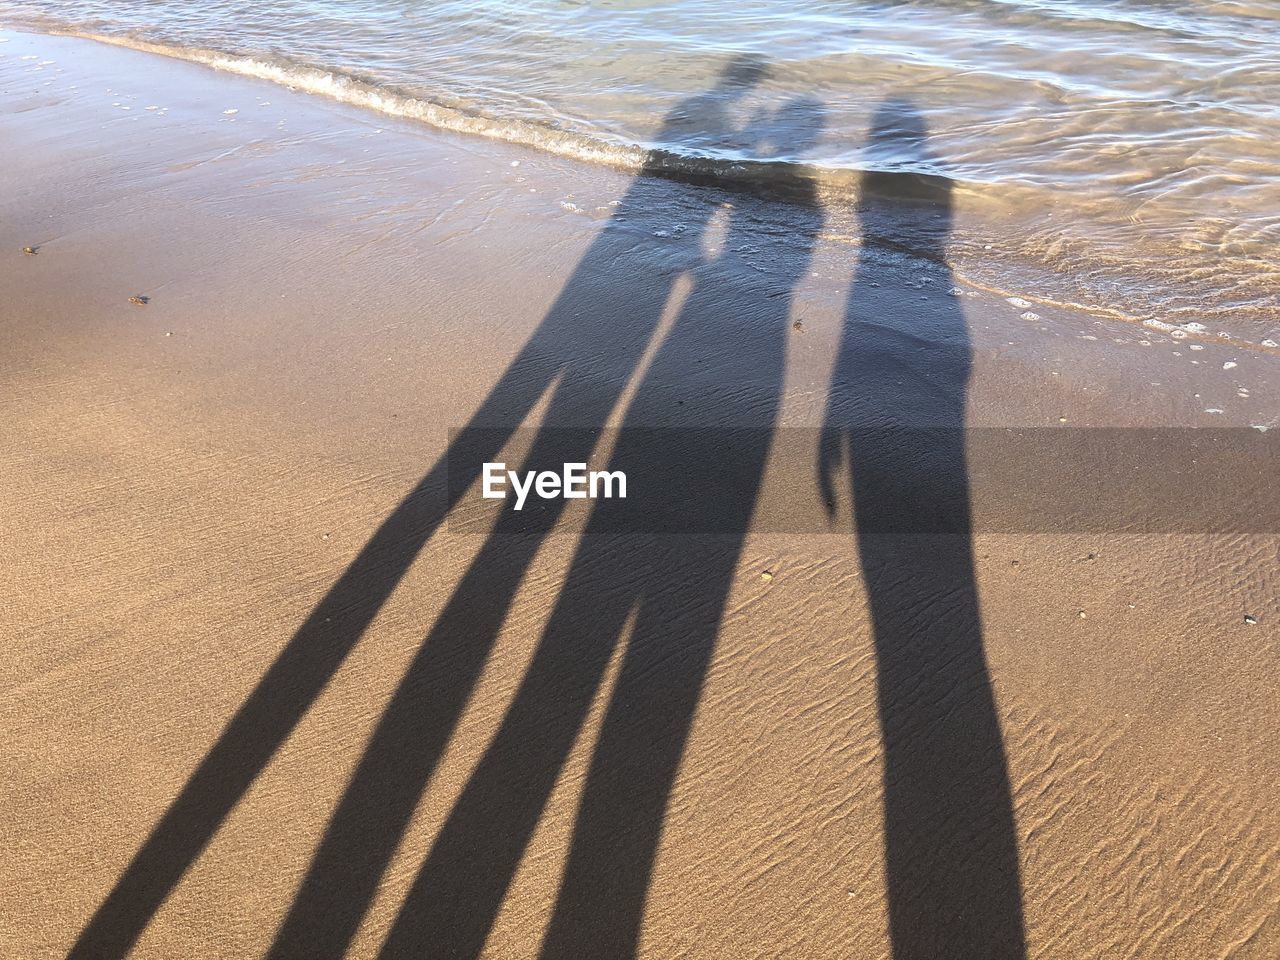 SHADOW OF PERSON ON BEACH